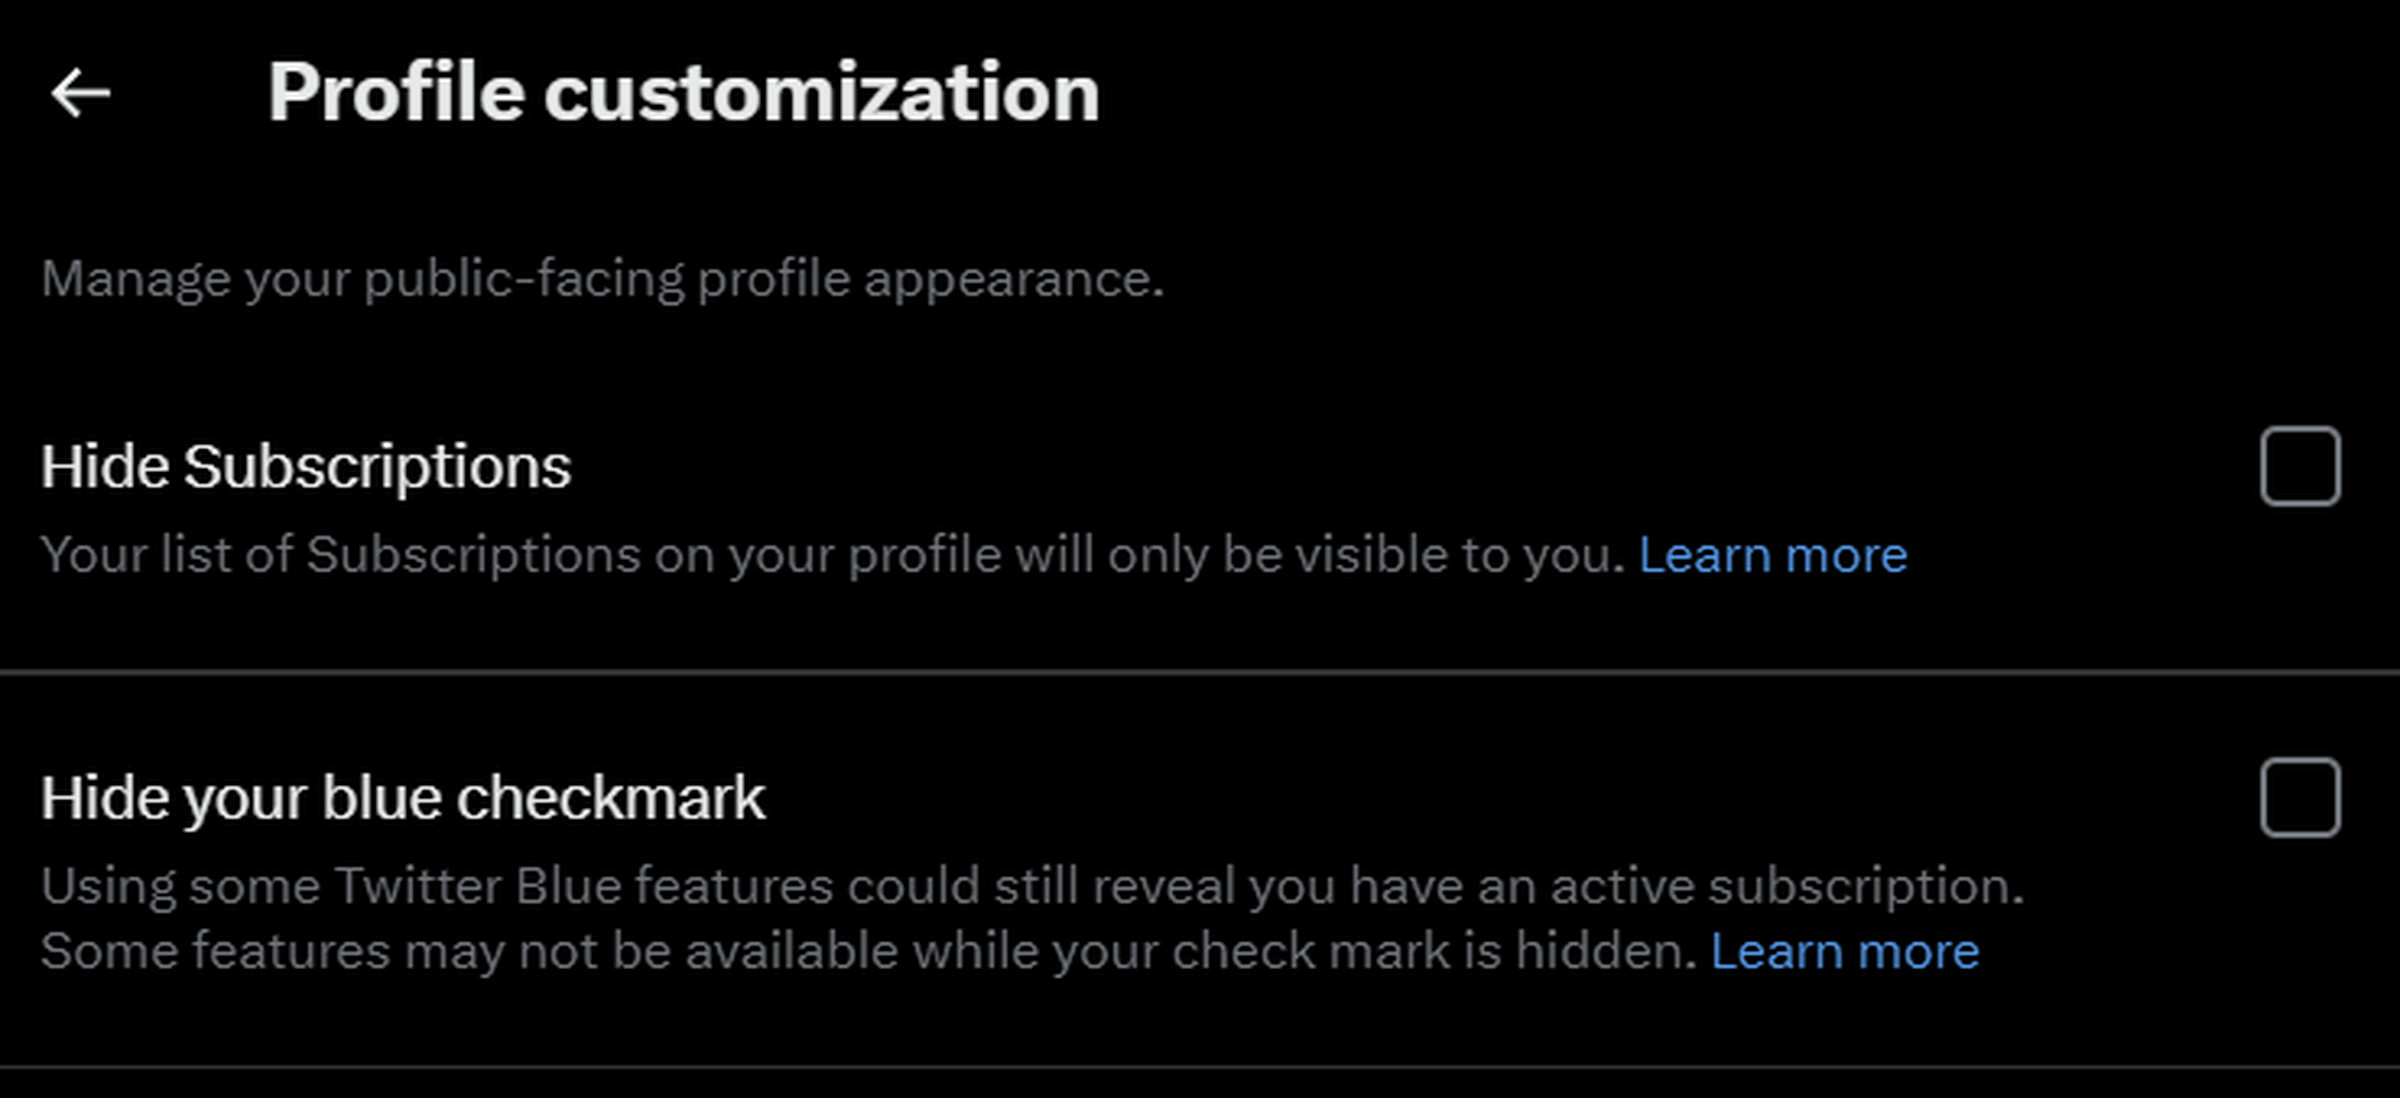 The new hide blue checkmark option.